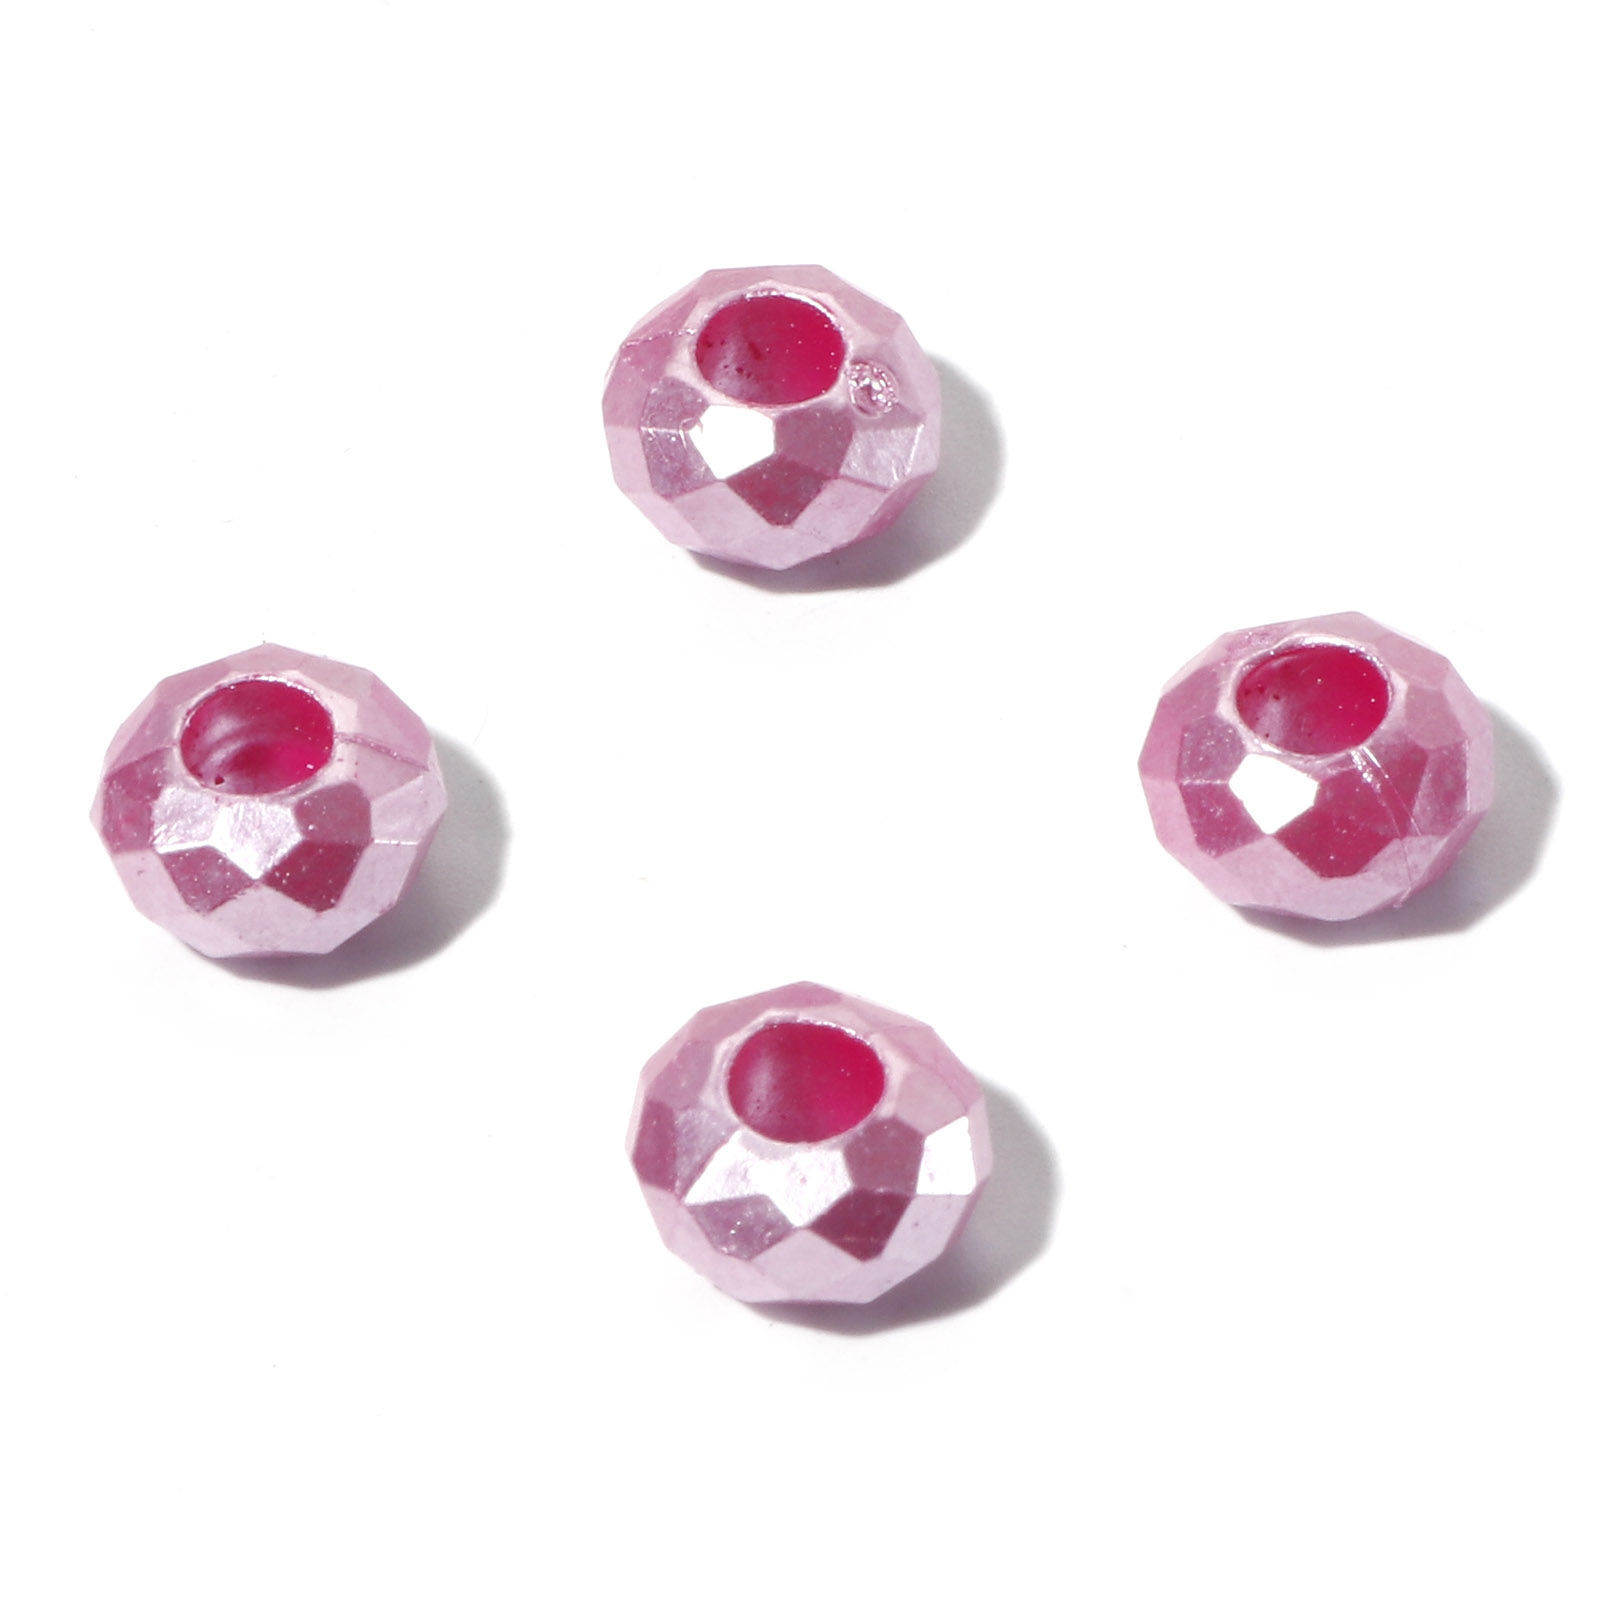 Picture of Acrylic European Style Large Hole Charm Beads Fuchsia Round Faceted 12mm Dia., Hole: Approx 4.6mm, 100 PCs